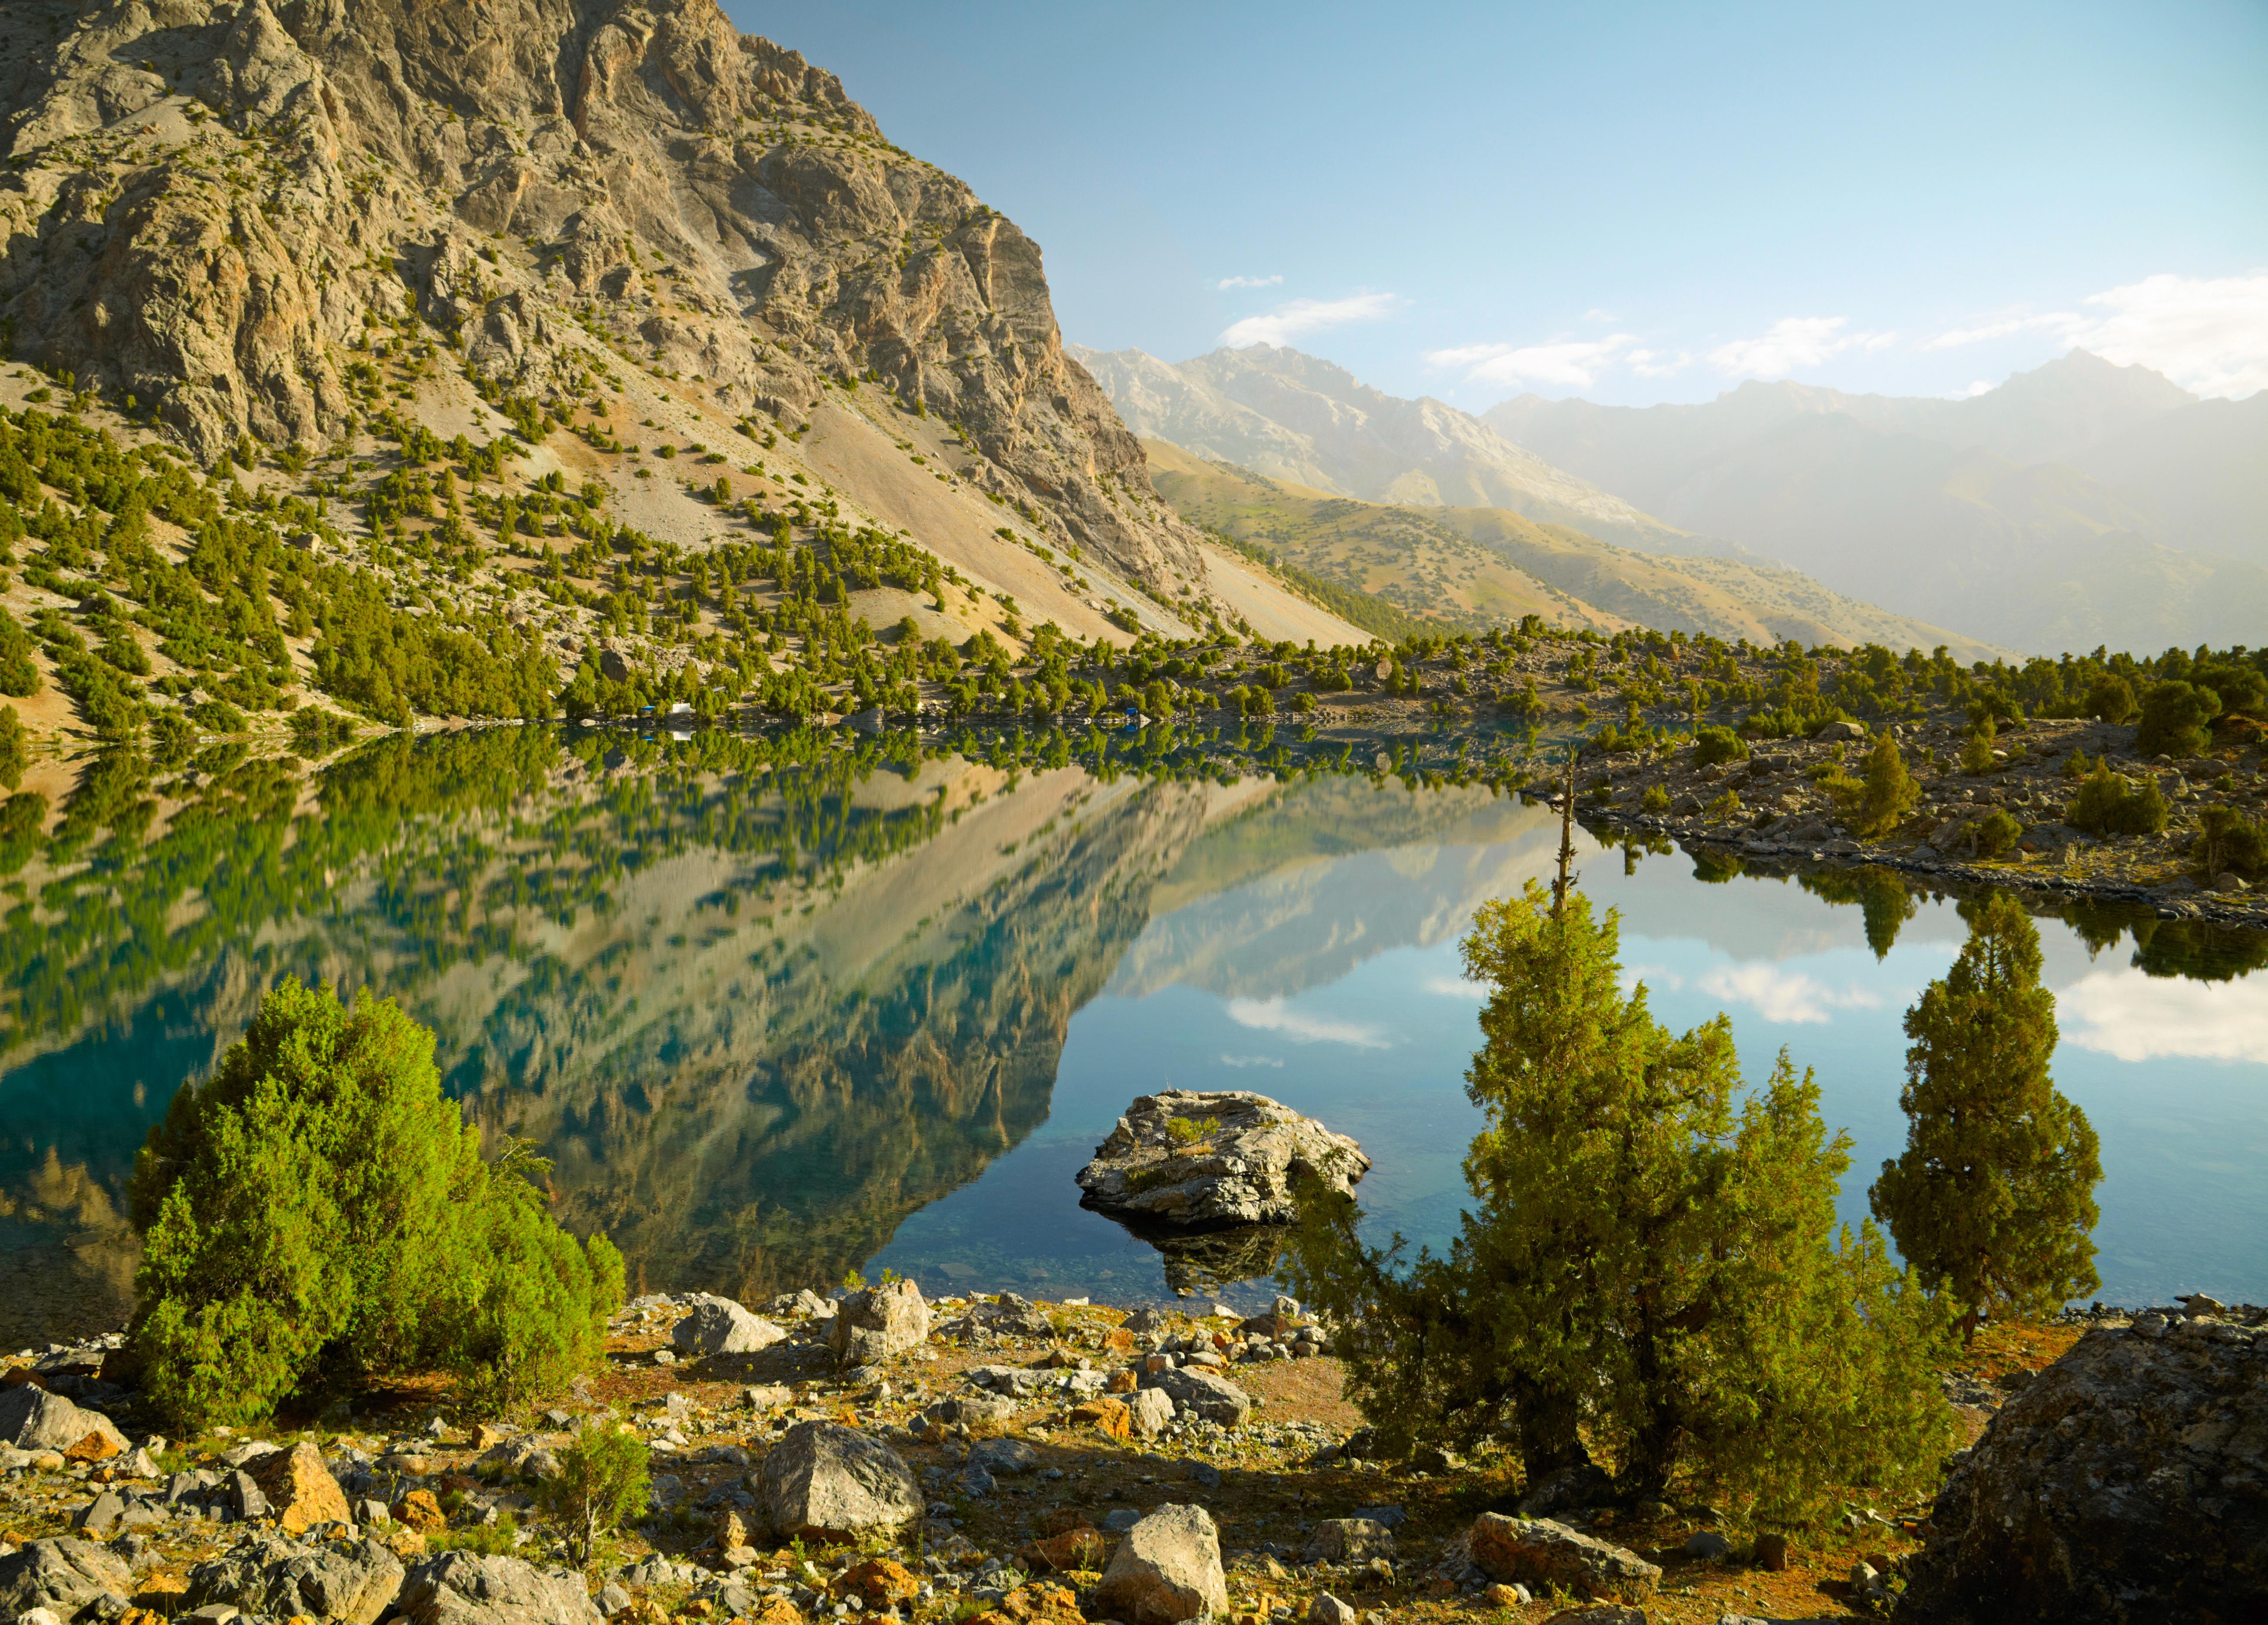 Lake in the Fann Mountains - Photo by SJ Travel Photo and Video